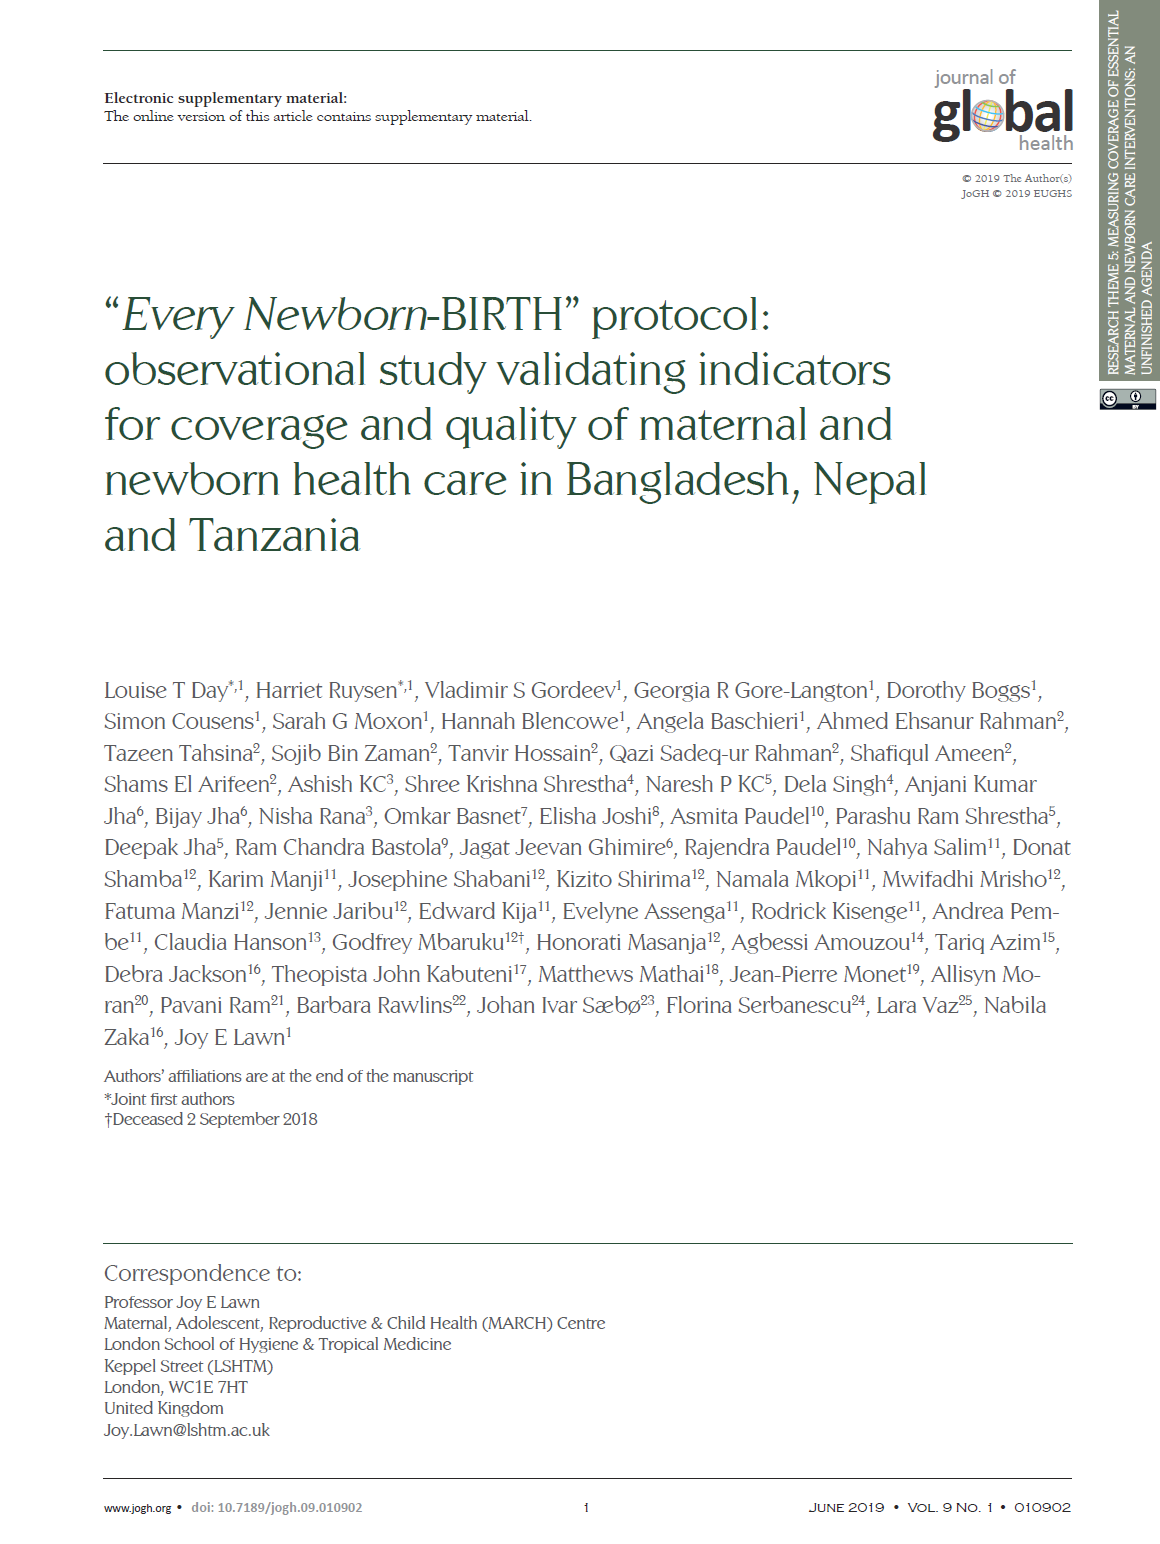 Every Newborn-BIRTH protocol: observational study validating indicators for coverage and quality of maternal and newborn health care in Bangladesh